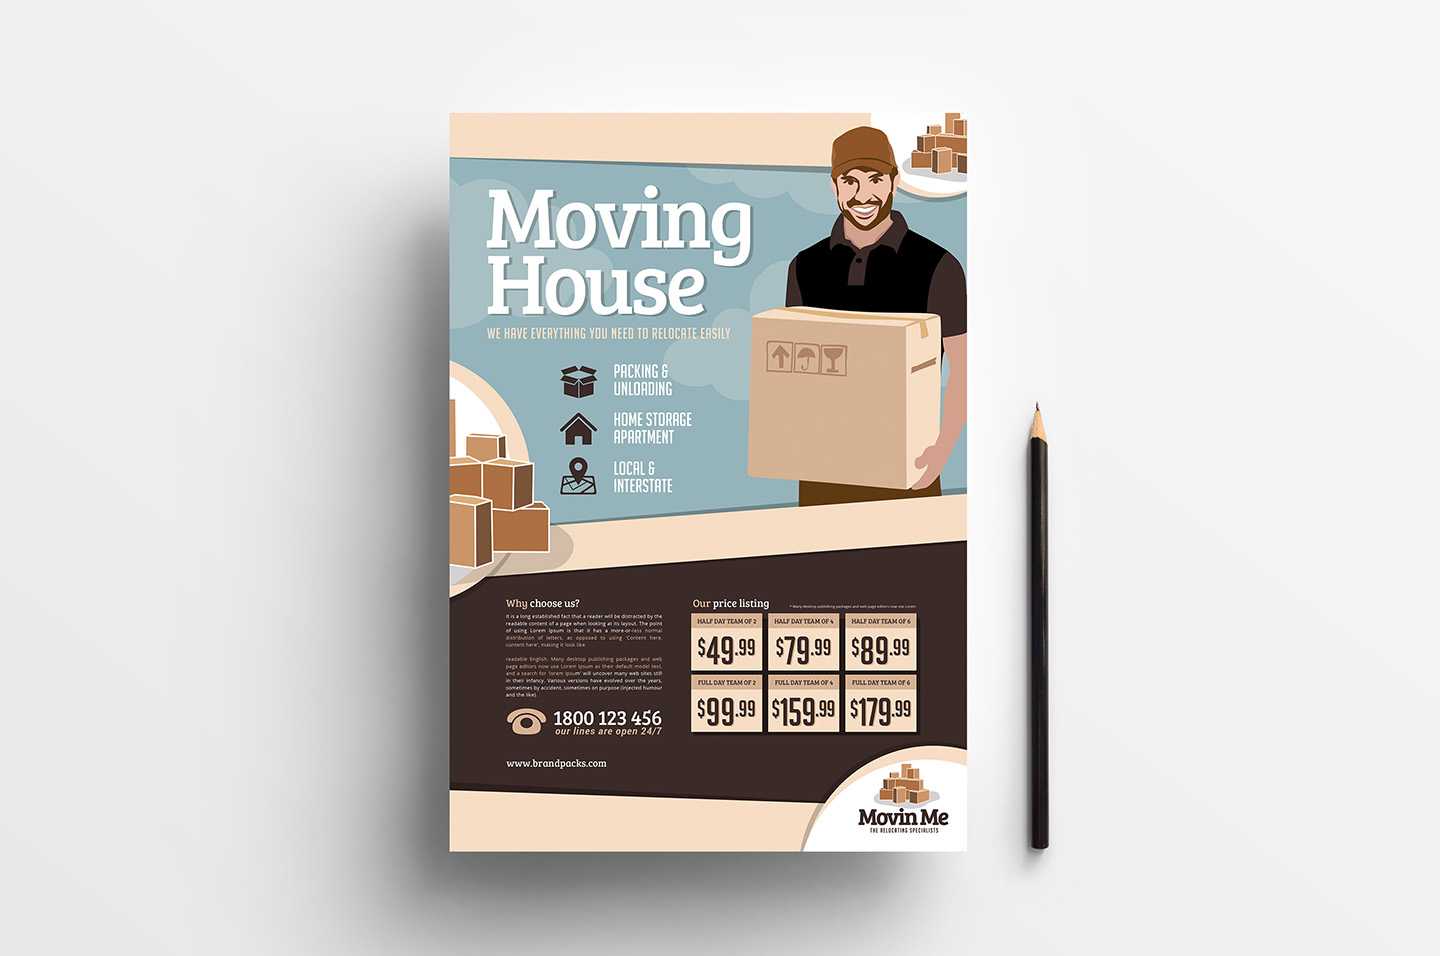 Free Moving House Poster Template For Photoshop & Illustrator Throughout Free Moving House Cards Templates